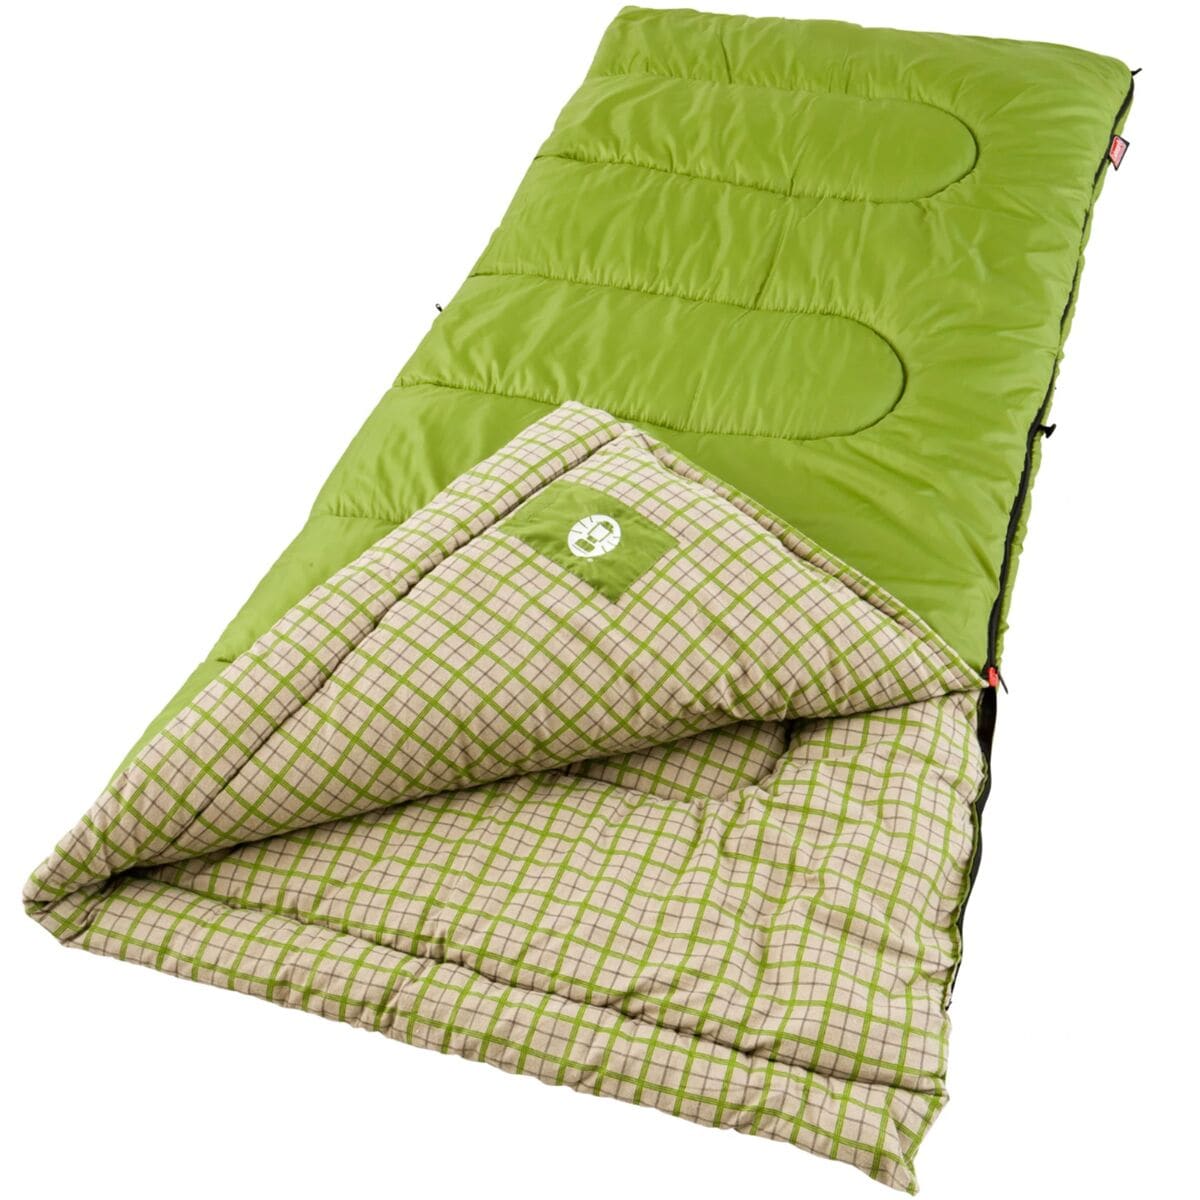 Coleman Green Valley Cool Weather Sleeping Bag: 30F Synthetic